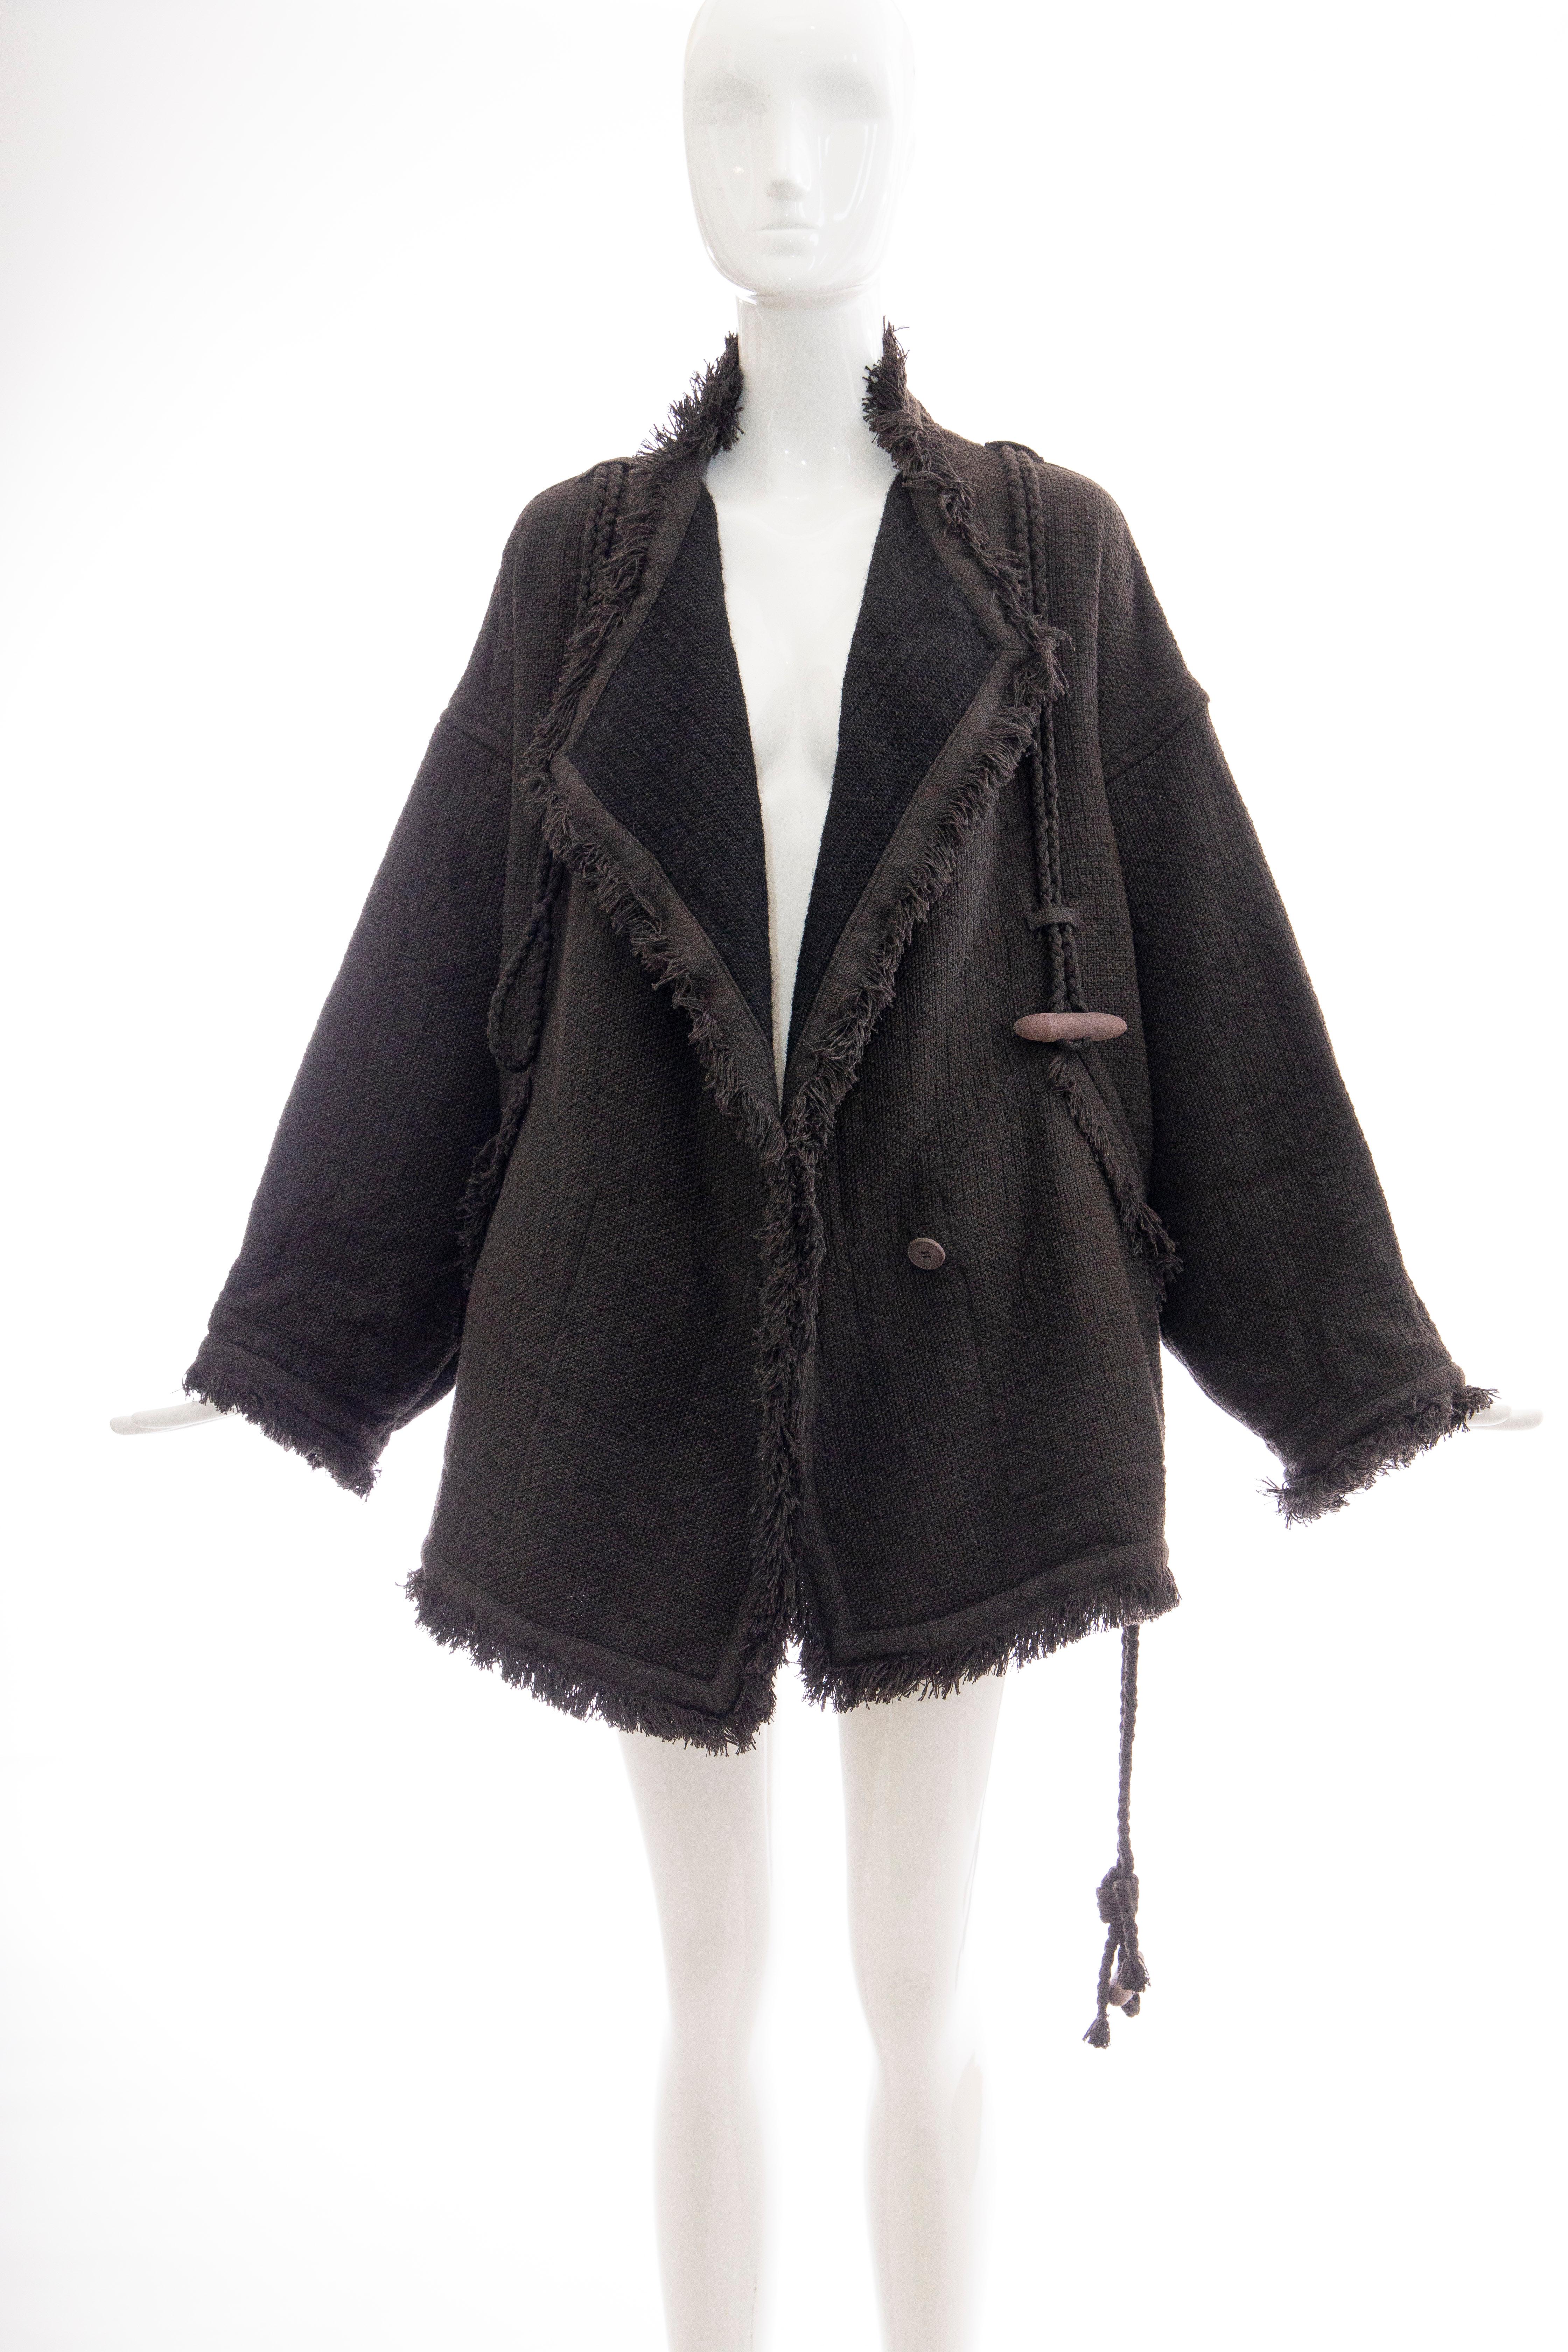 Issey Miyake Charcoal Grey Fringed Cotton Wool Woven Jacket, Fall 1984 For Sale 4